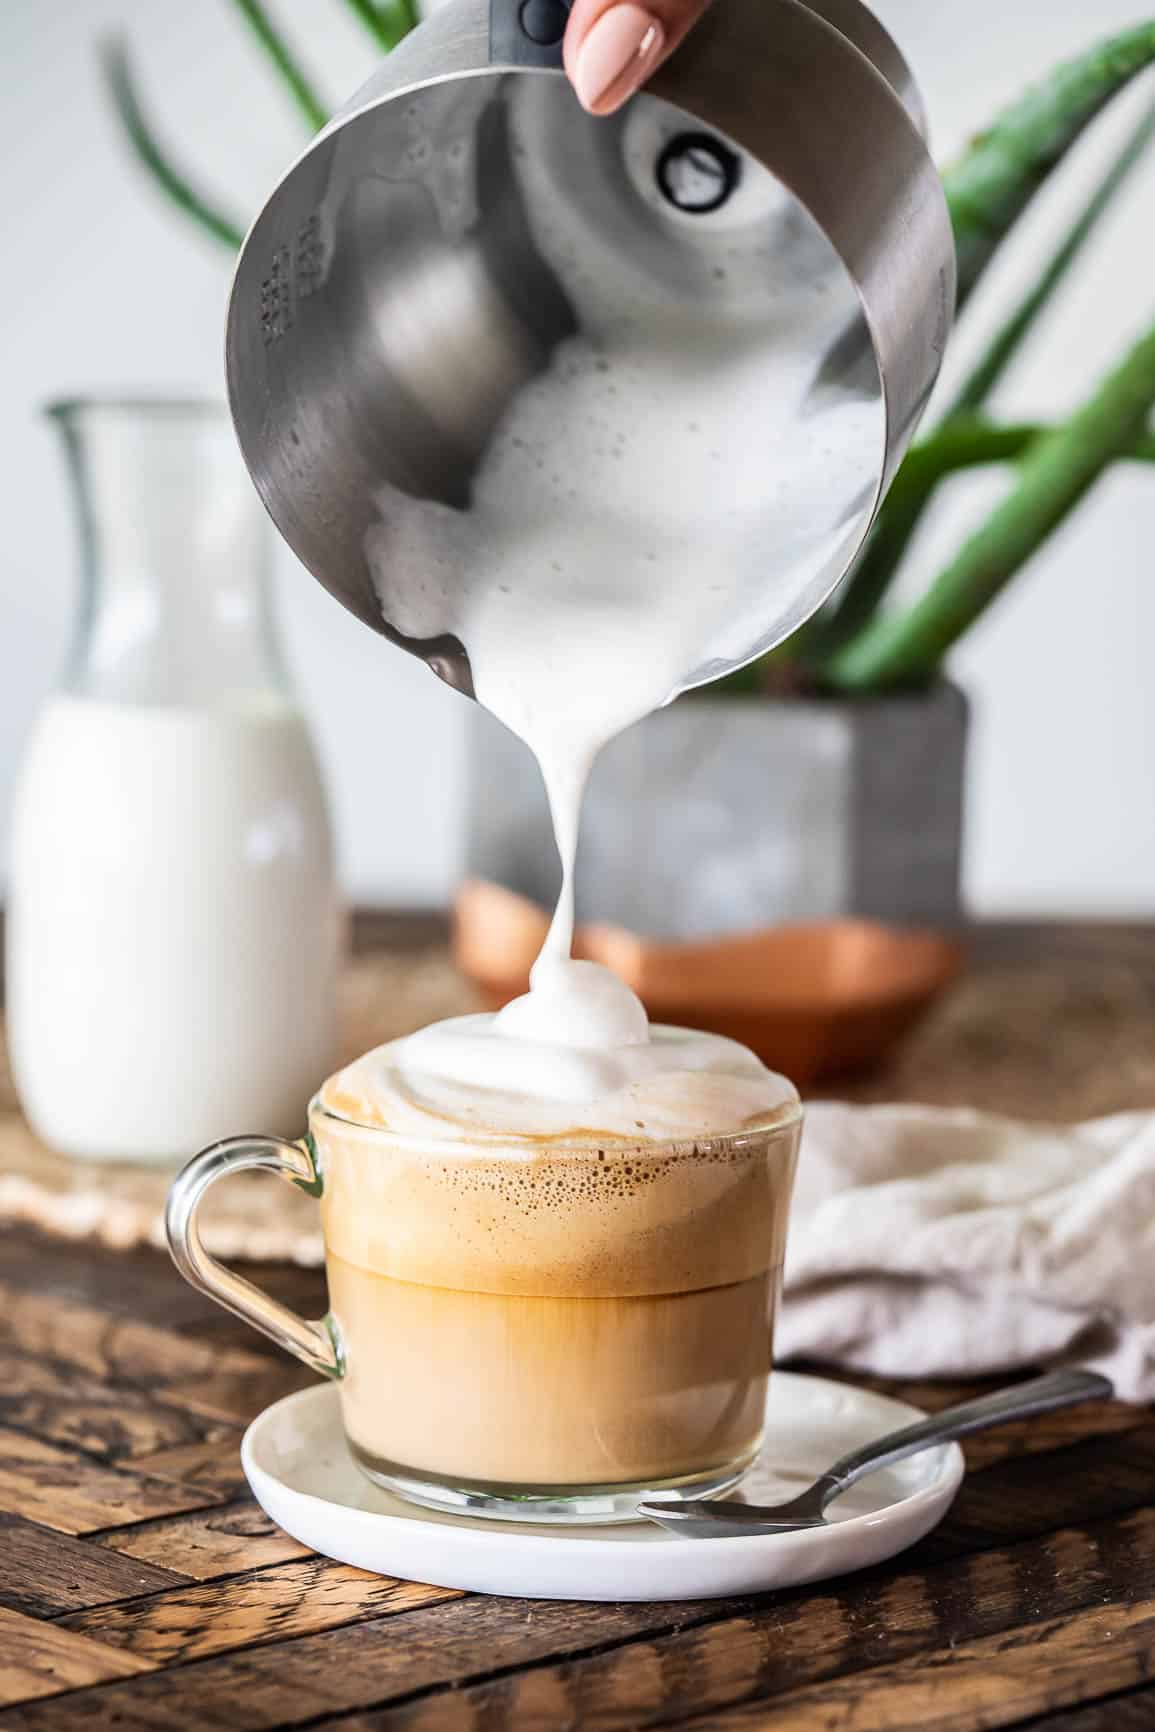 How to Froth Coffee Creamer